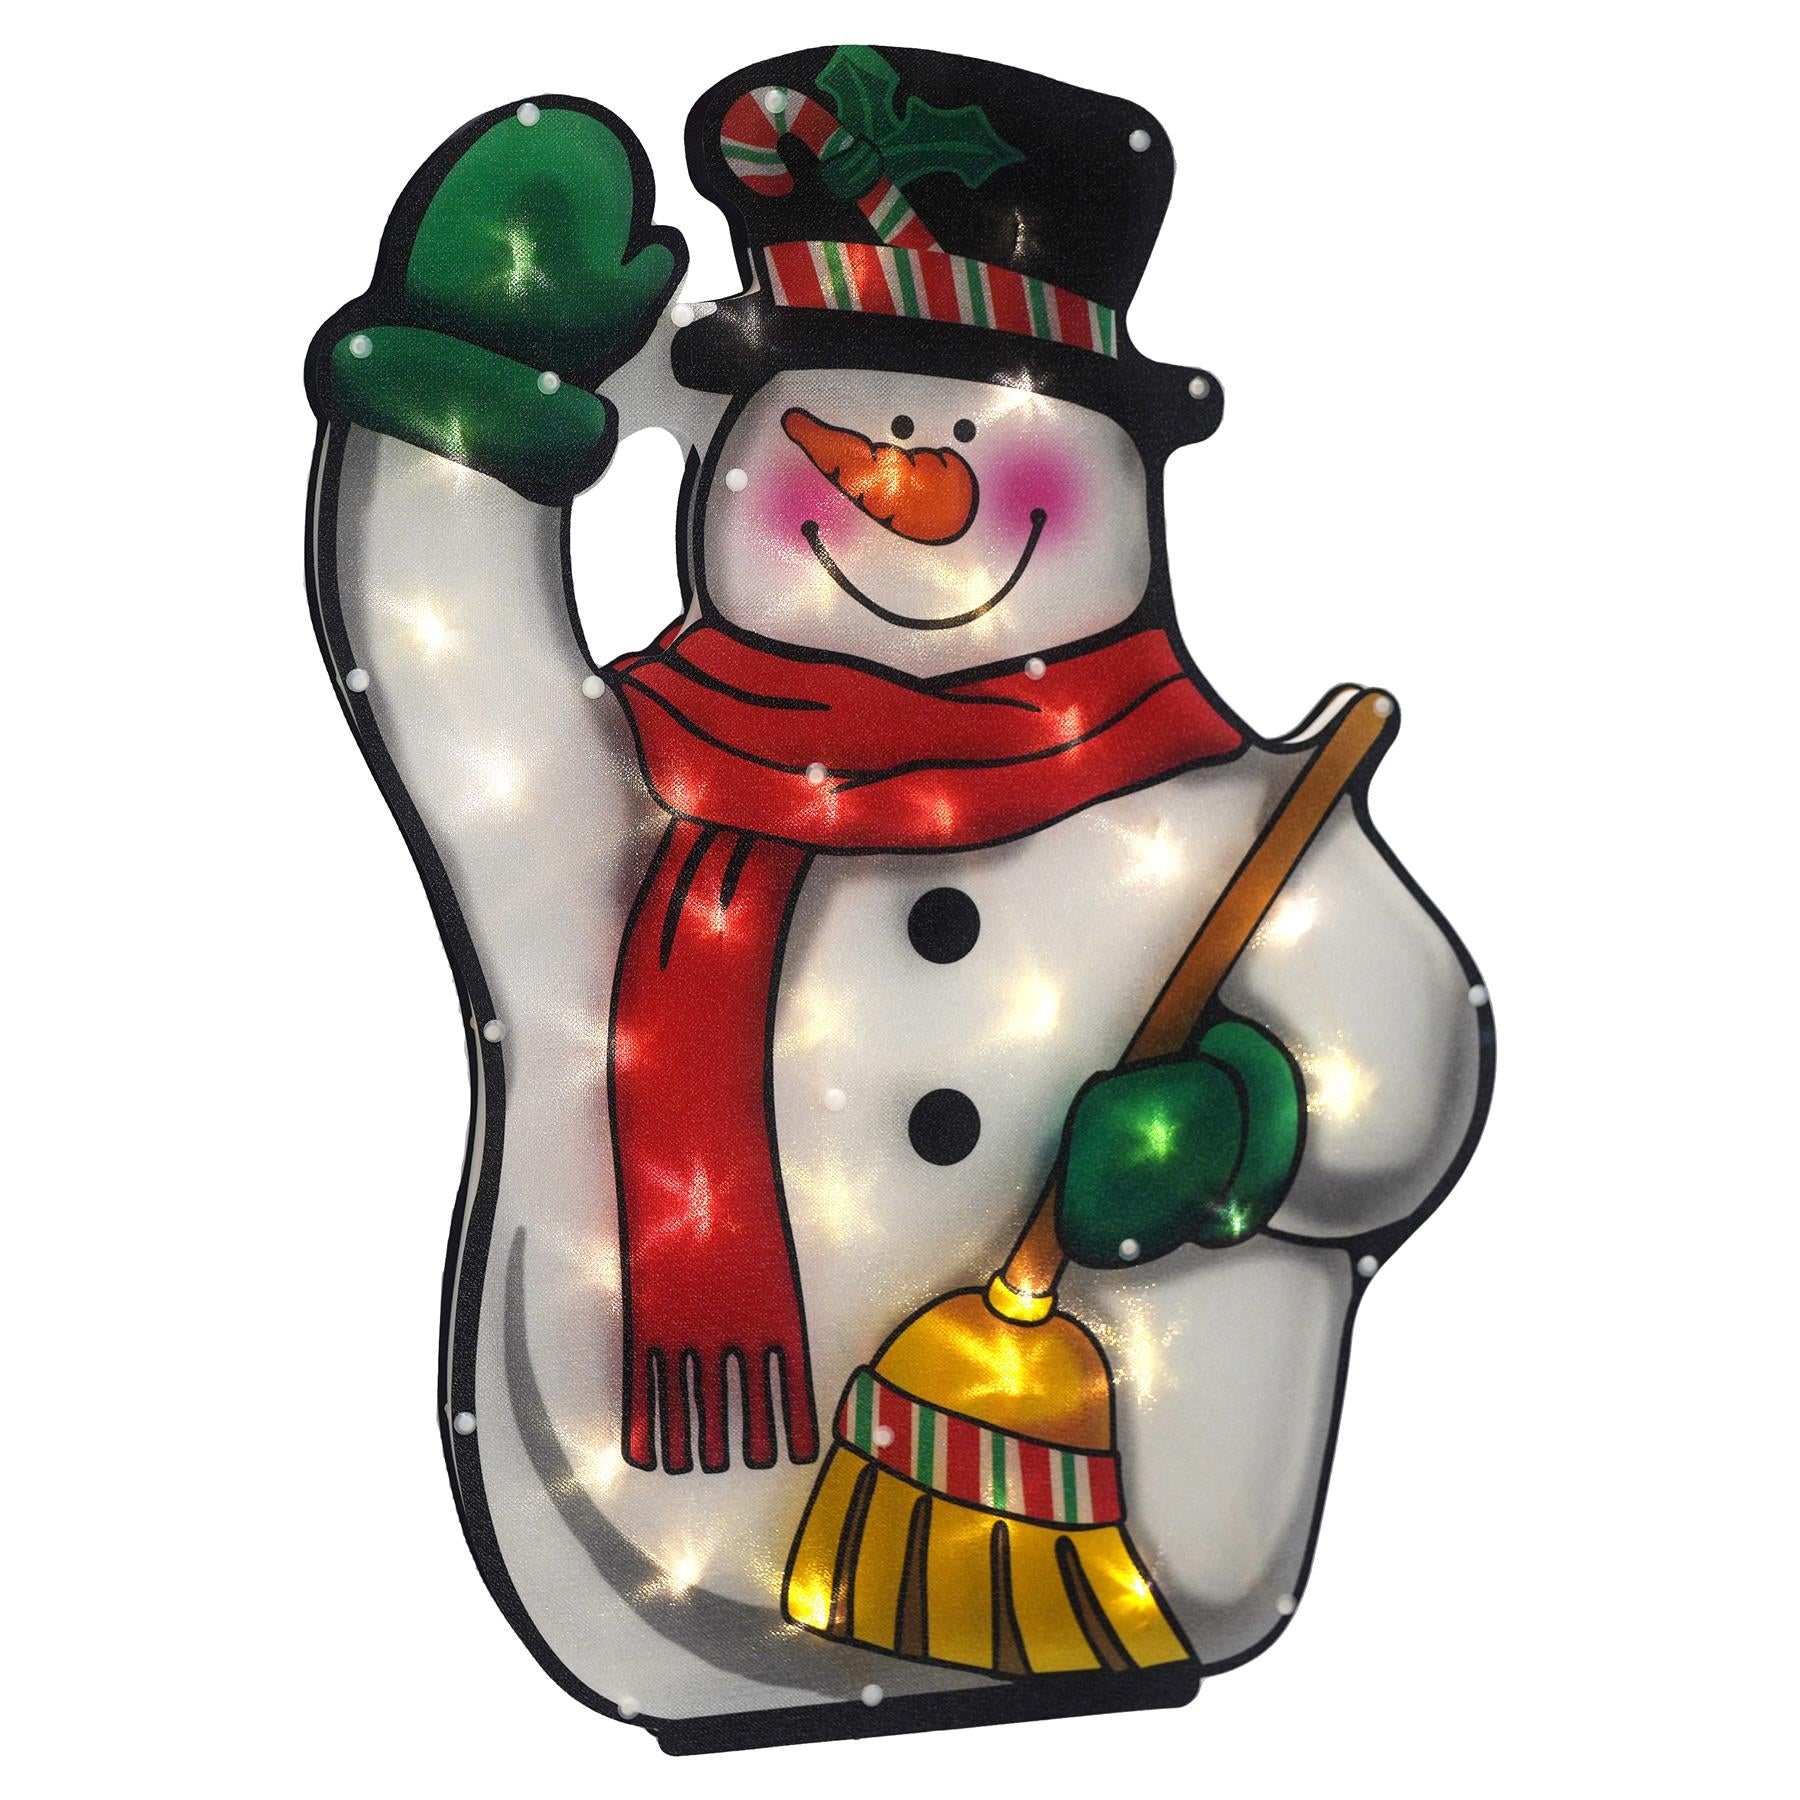 Christmas Silhouette Broom & Snowman by GEEZY - The Magic Toy Shop